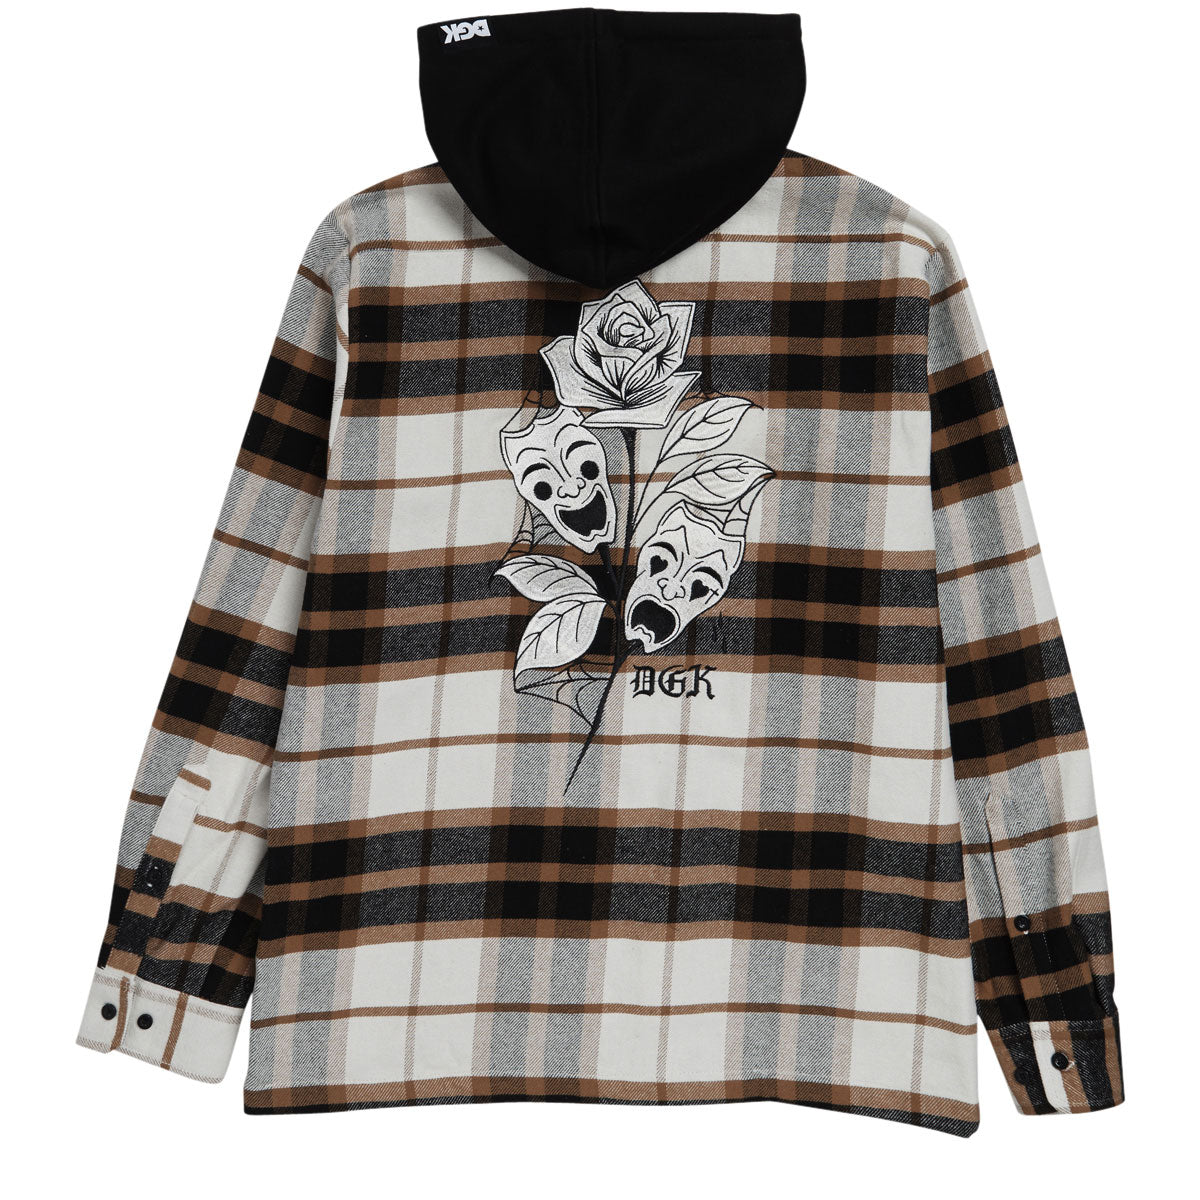 DGK Cry Later Flannel Shacket Jacket - Brown image 2